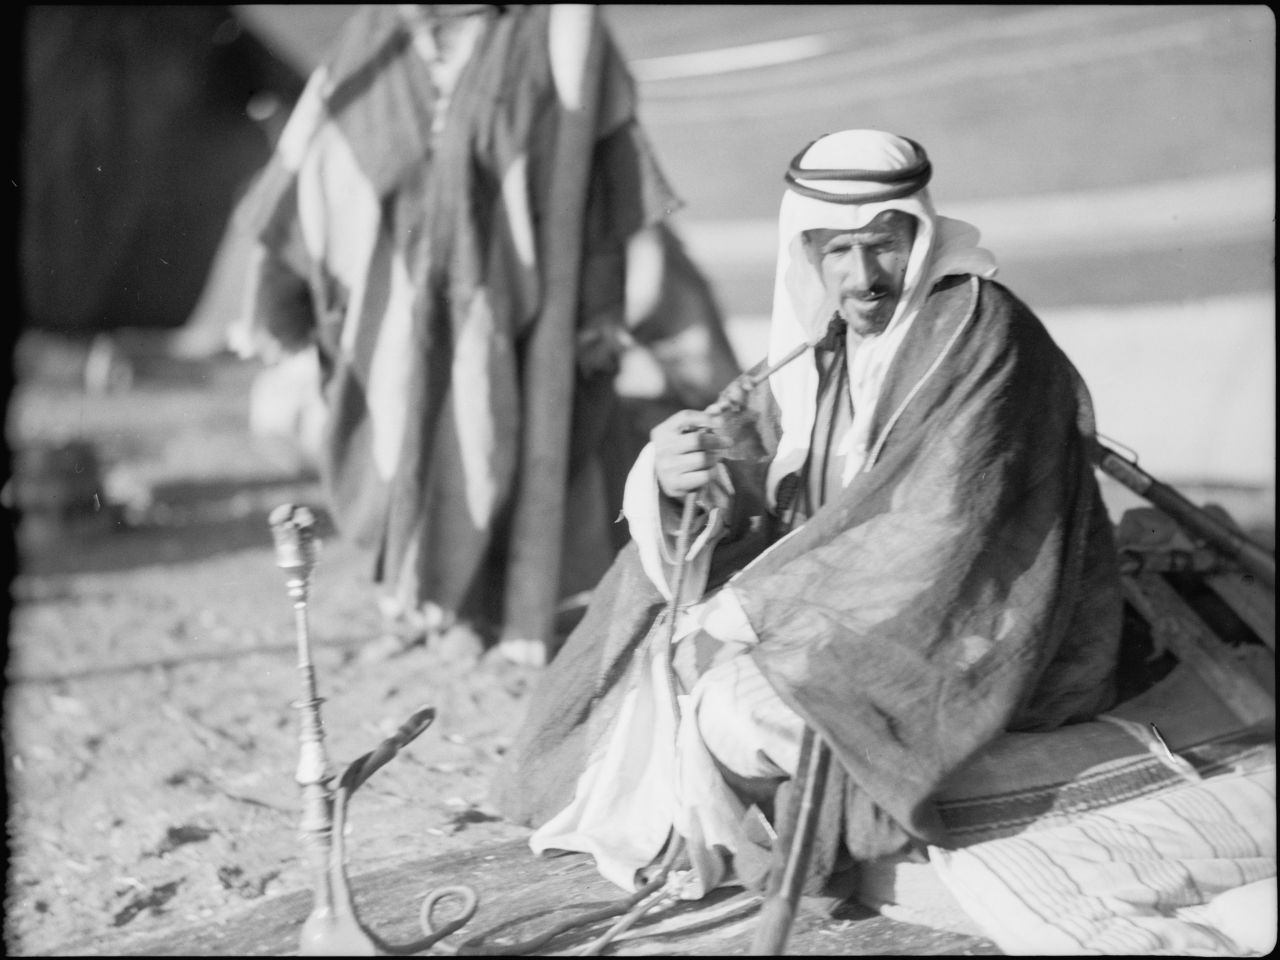 ‘Sheikh Muthgal [Mithqal] Pasha, seated in his tent while camping near Madaba’ (undated, 1930s). Source: Matson Photograph Collection, Library of Congress, USA, LC-DIG-matpc-15660.